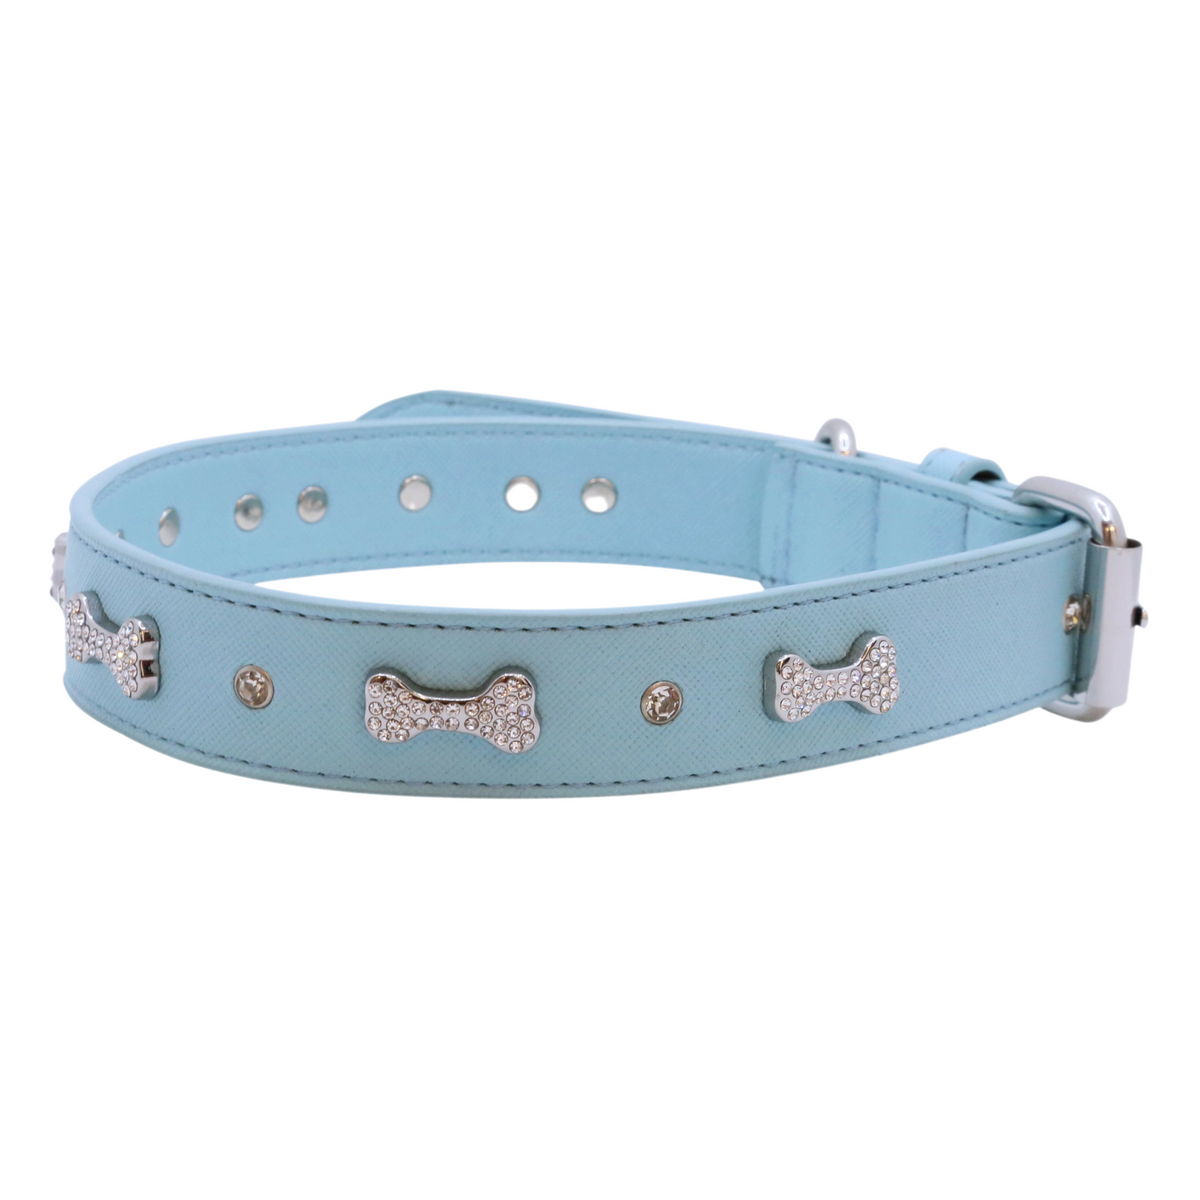 Giltmore 3-Row Crystal Pet Collar: Tiffy Blue – TeaCups, Puppies & Boutique